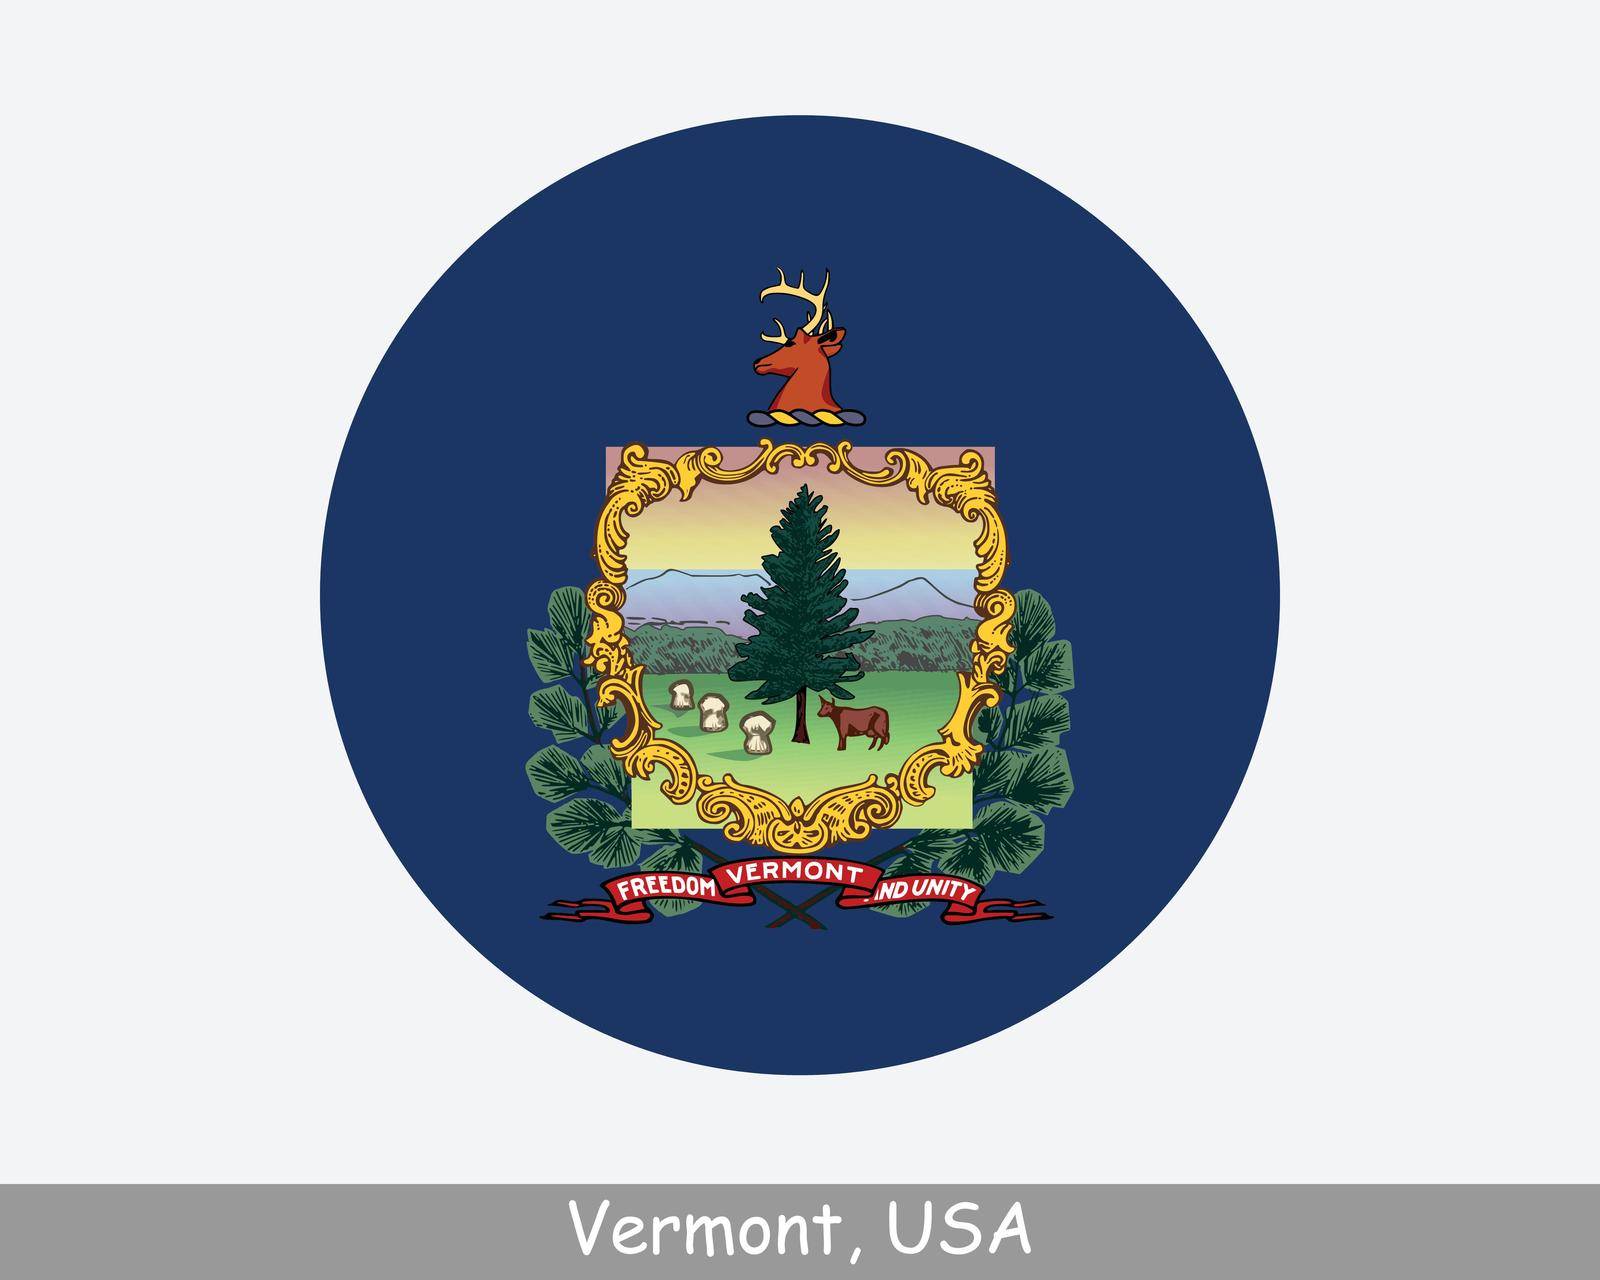 Vermont Round Circle Flag. VT USA State Circular Button Banner Icon. Vermont United States of America State Flag. The Green Mountain State EPS Vector